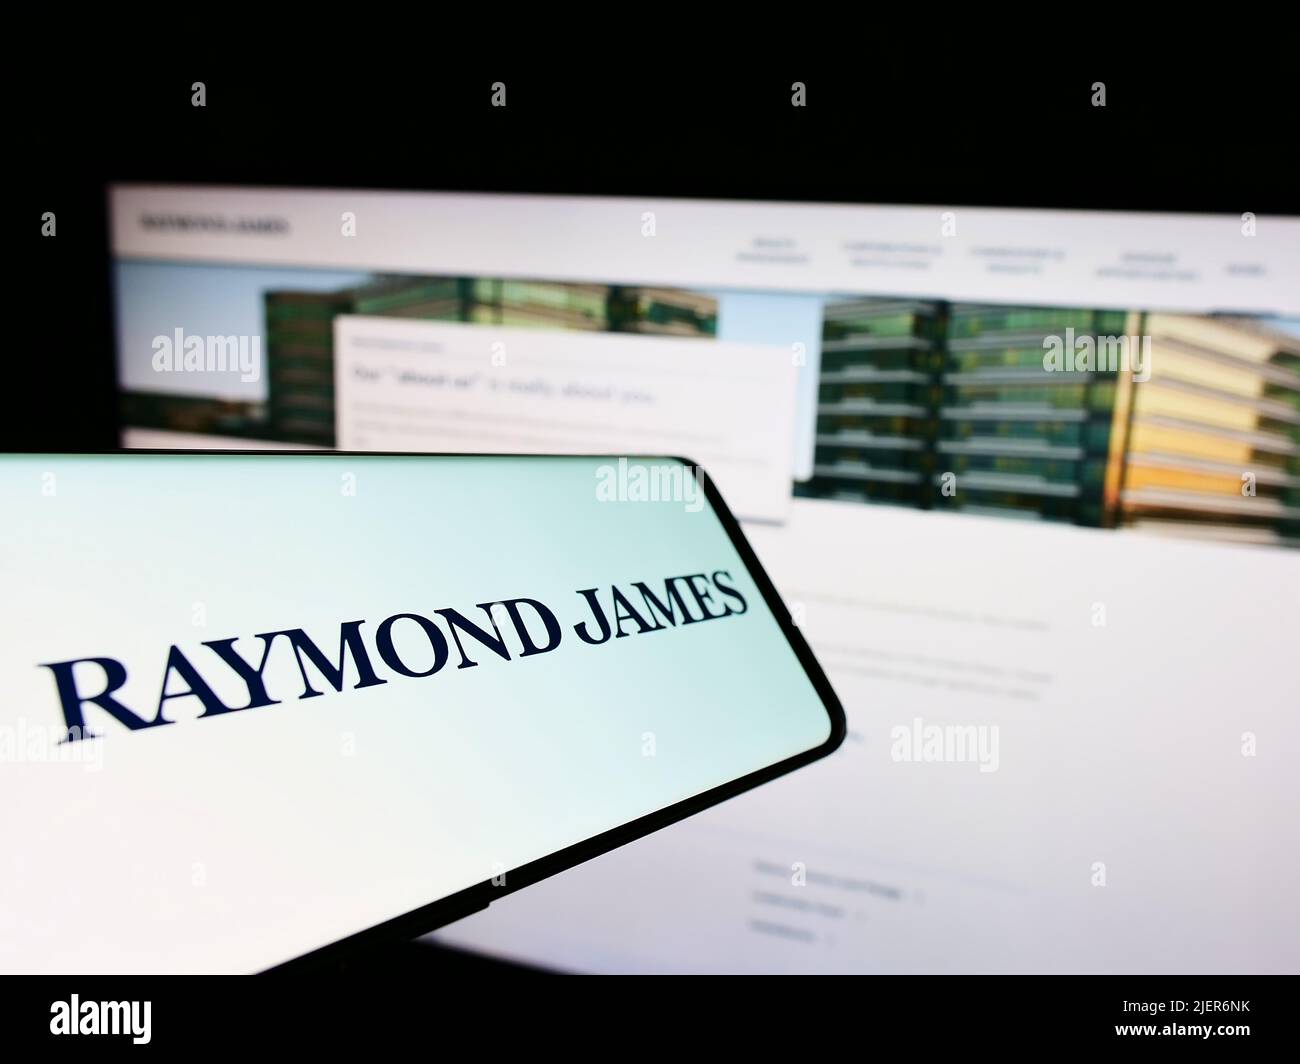 Smartphone with logo of American company Raymond James Financial Inc. on screen in front of website. Focus on center-right of phone display. Stock Photo